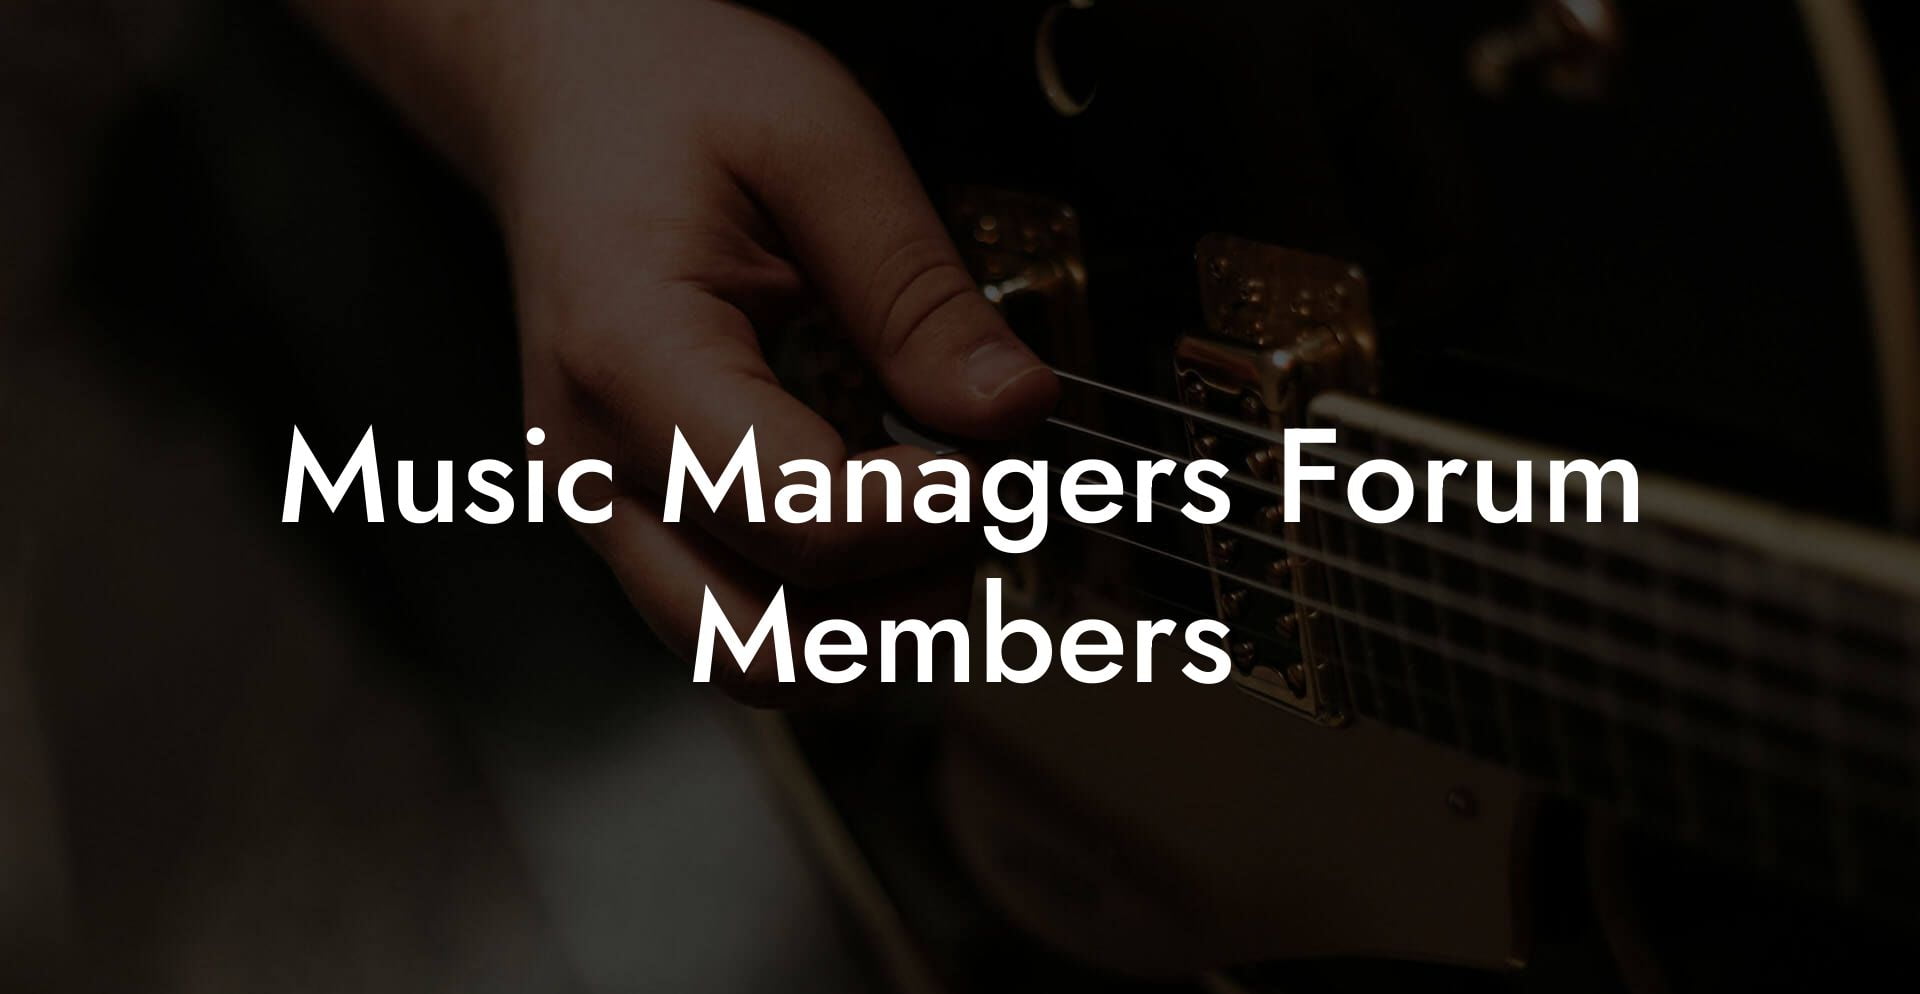 Music Managers Forum Members